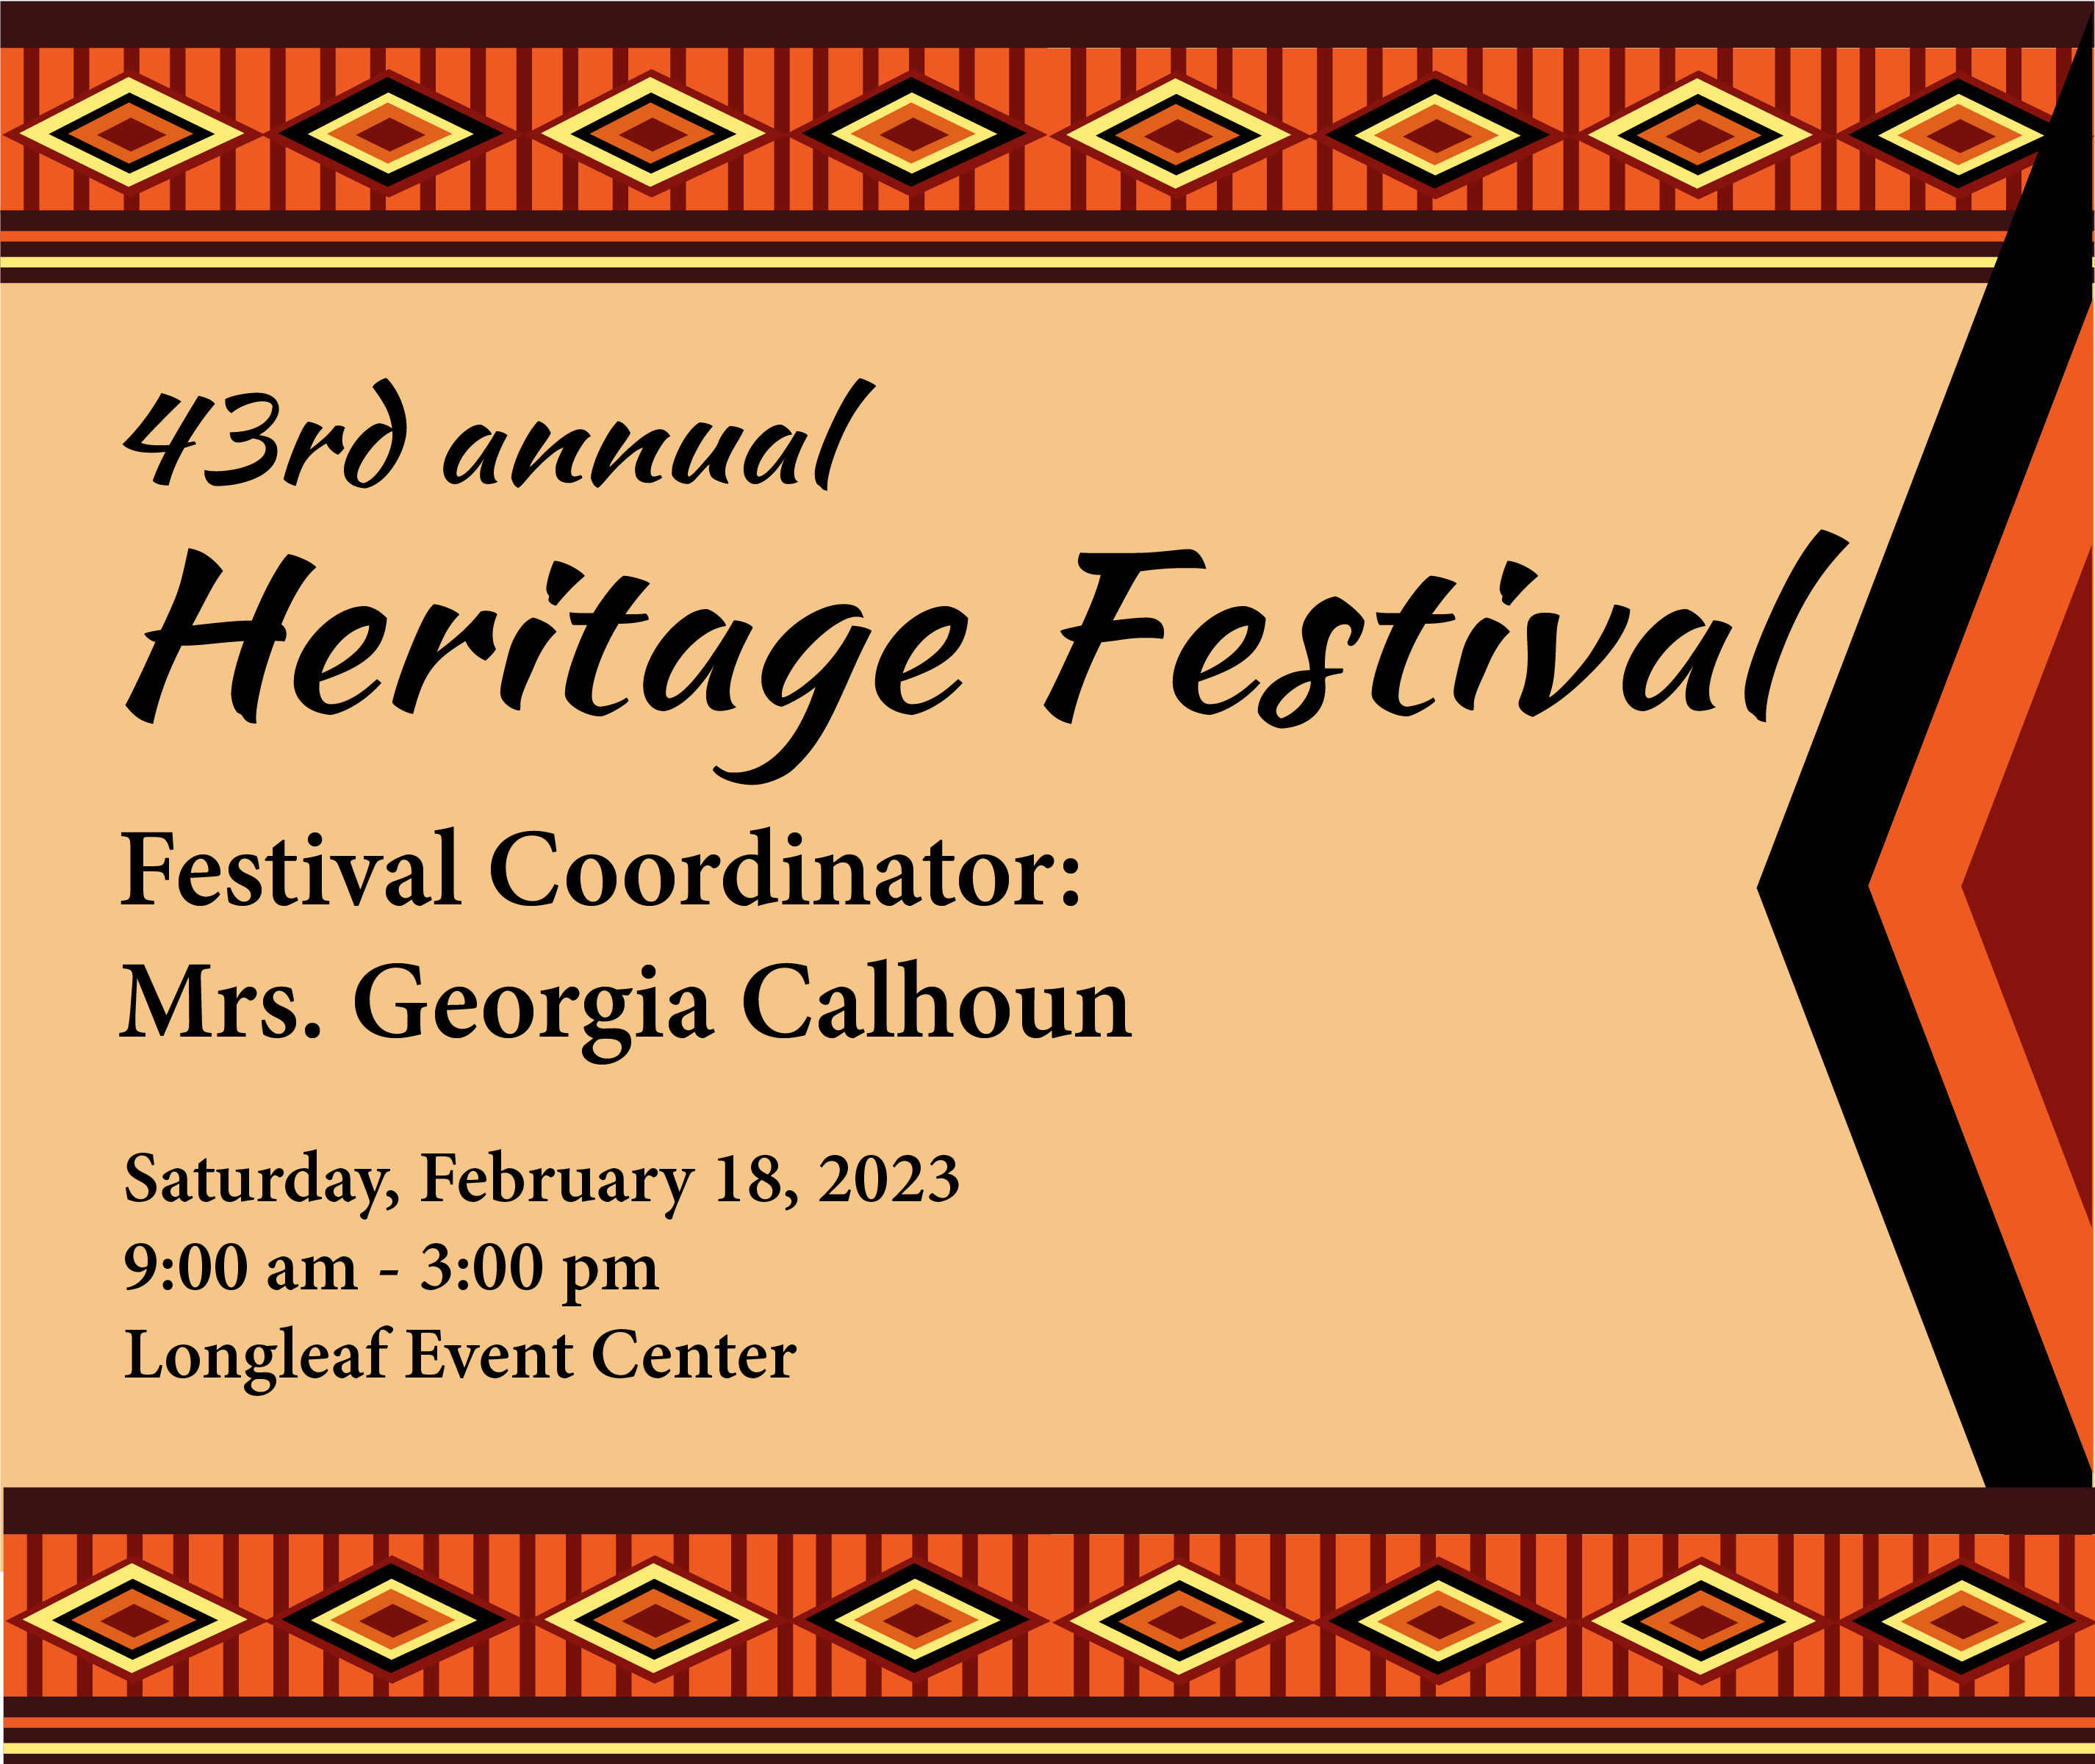 43rd annual Heritage Festival: 43 Years of Poetry Celebrations